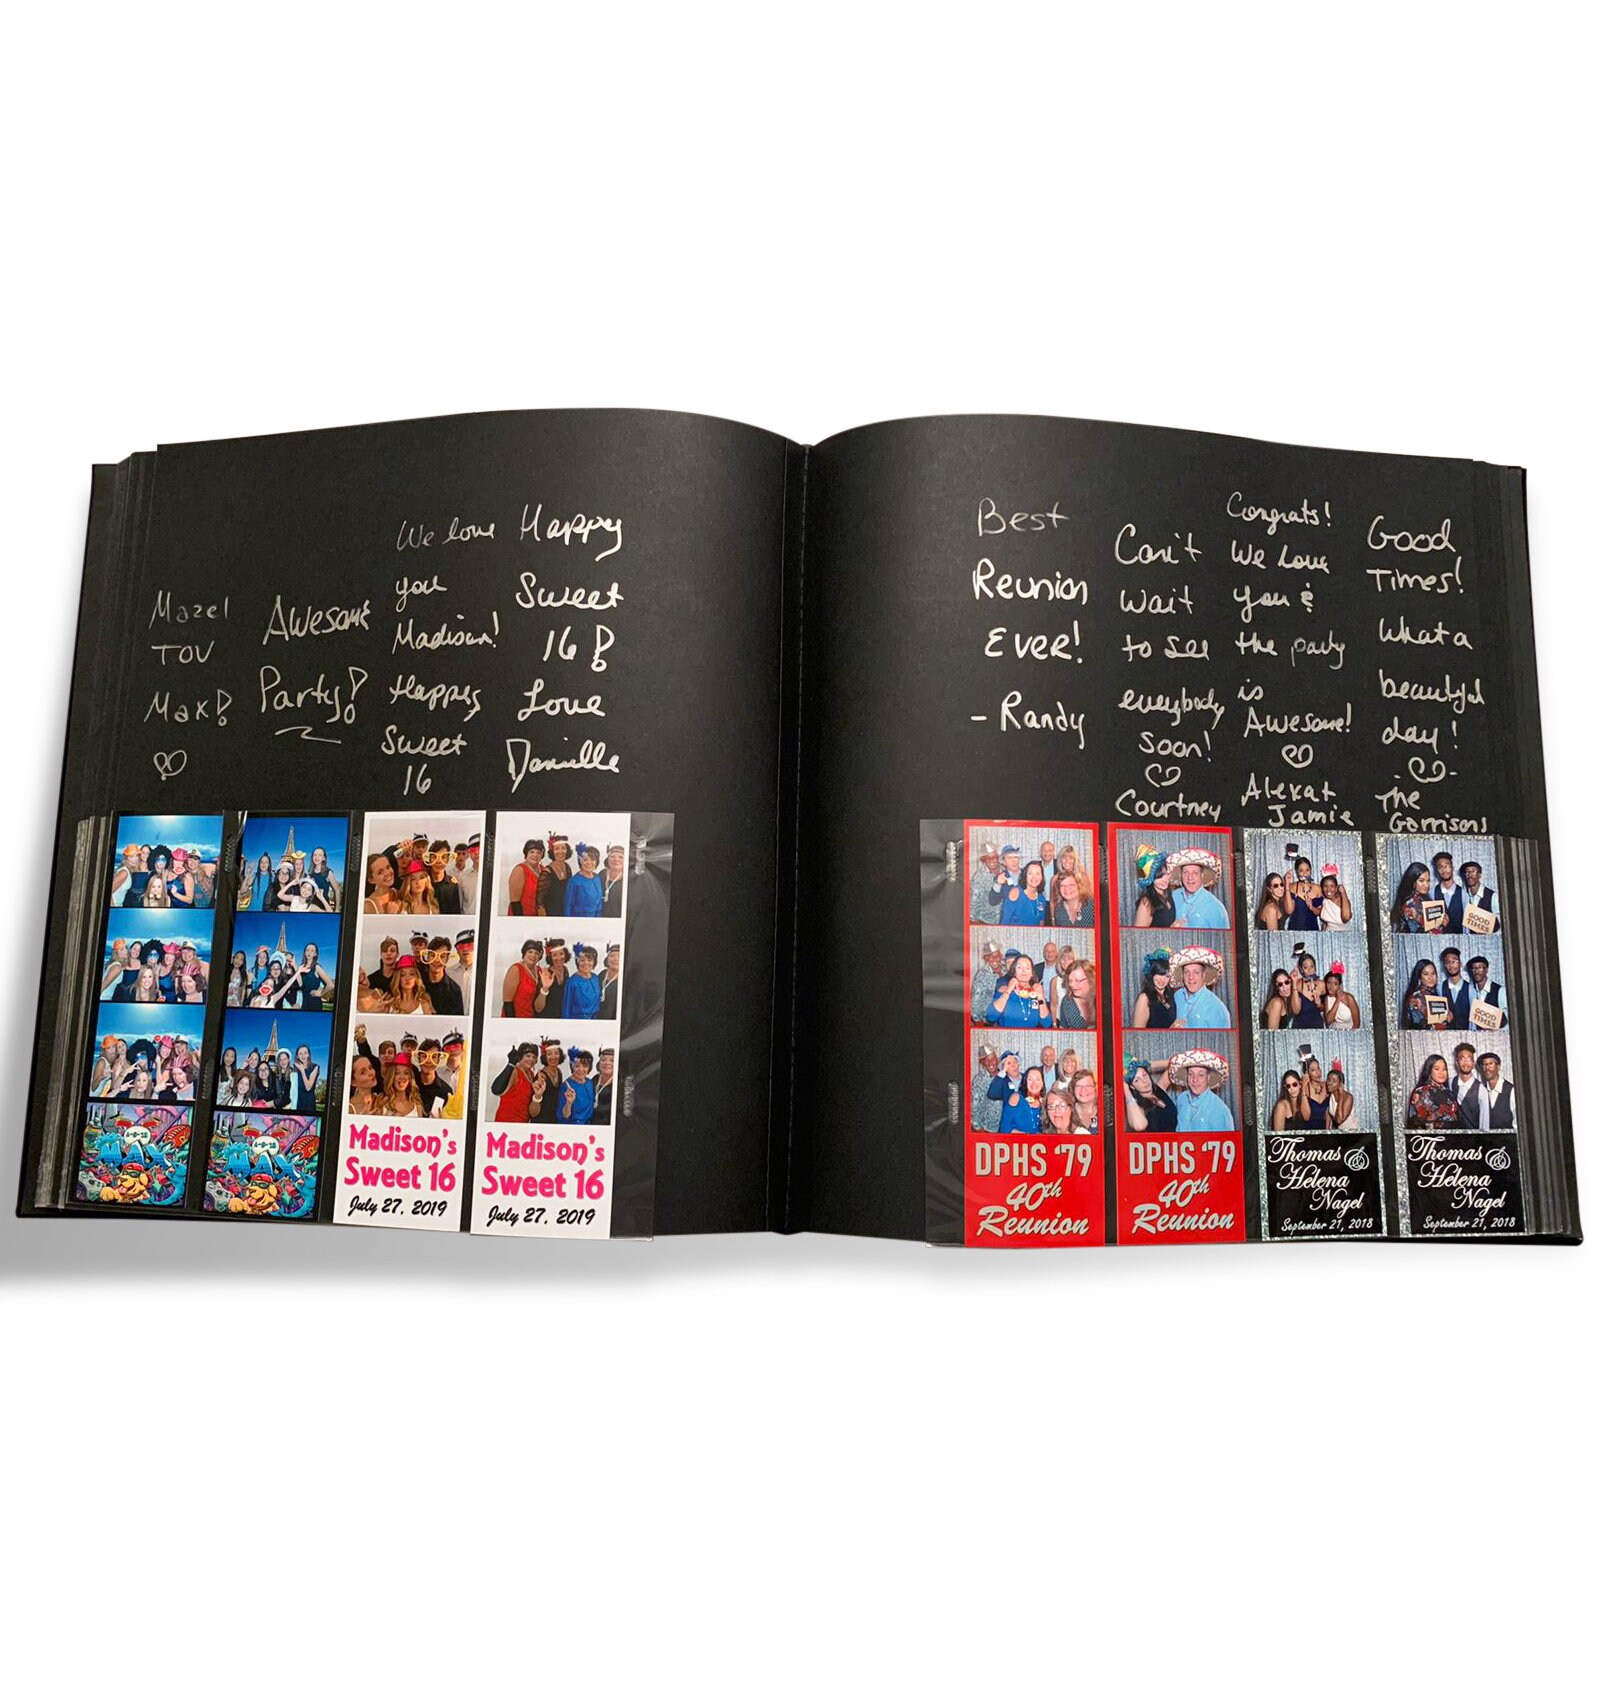  Photo Booth Photo Album - For Wedding or Party- Holds 120  Photobooth 2x6 Photo Strips - Slide In, LITTLE HOUSES